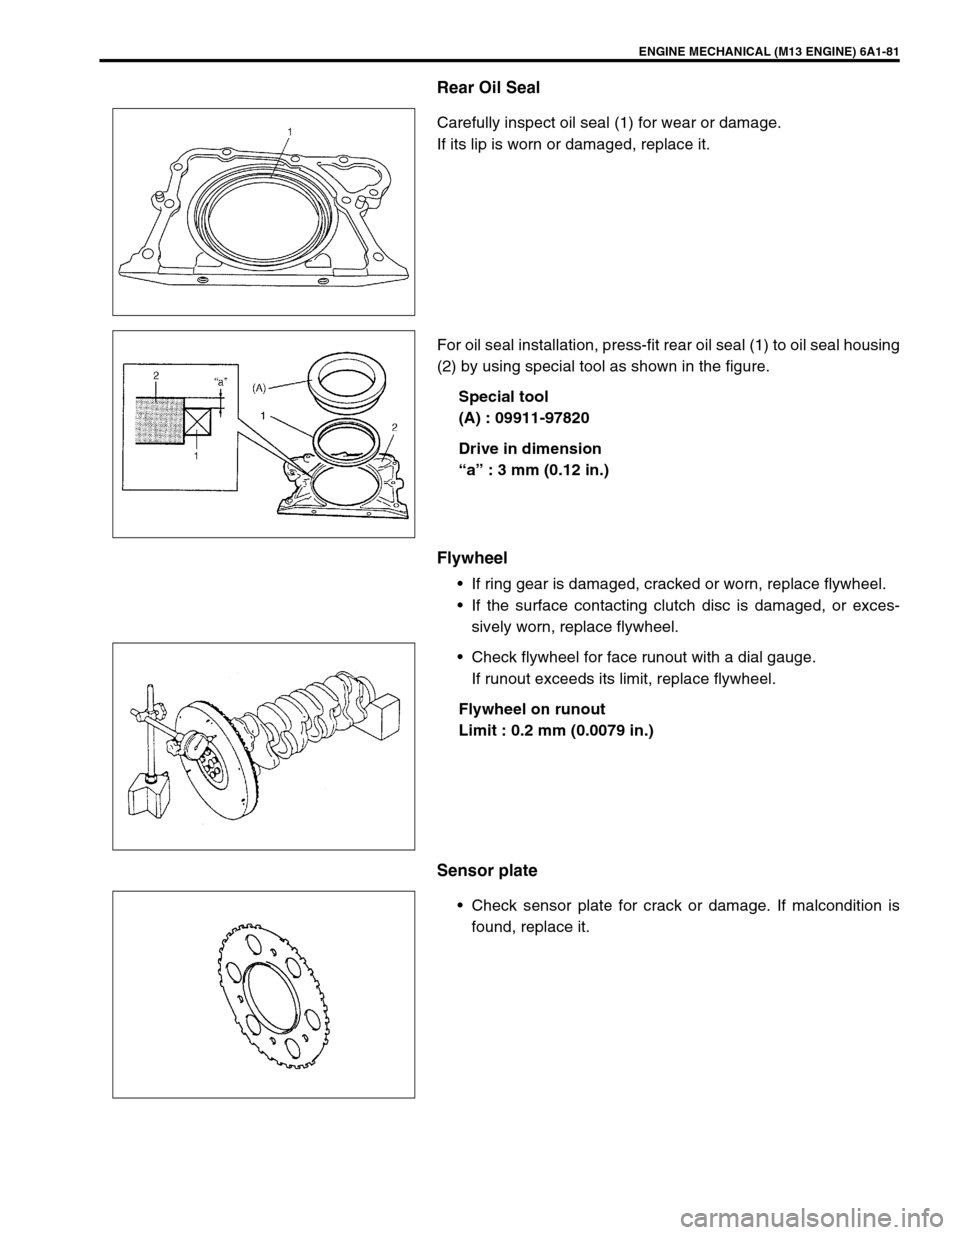 SUZUKI SWIFT 2000 1.G RG413 Service Service Manual ENGINE MECHANICAL (M13 ENGINE) 6A1-81
Rear Oil Seal
Carefully inspect oil seal (1) for wear or damage.
If its lip is worn or damaged, replace it.
For oil seal installation, press-fit rear oil seal (1)